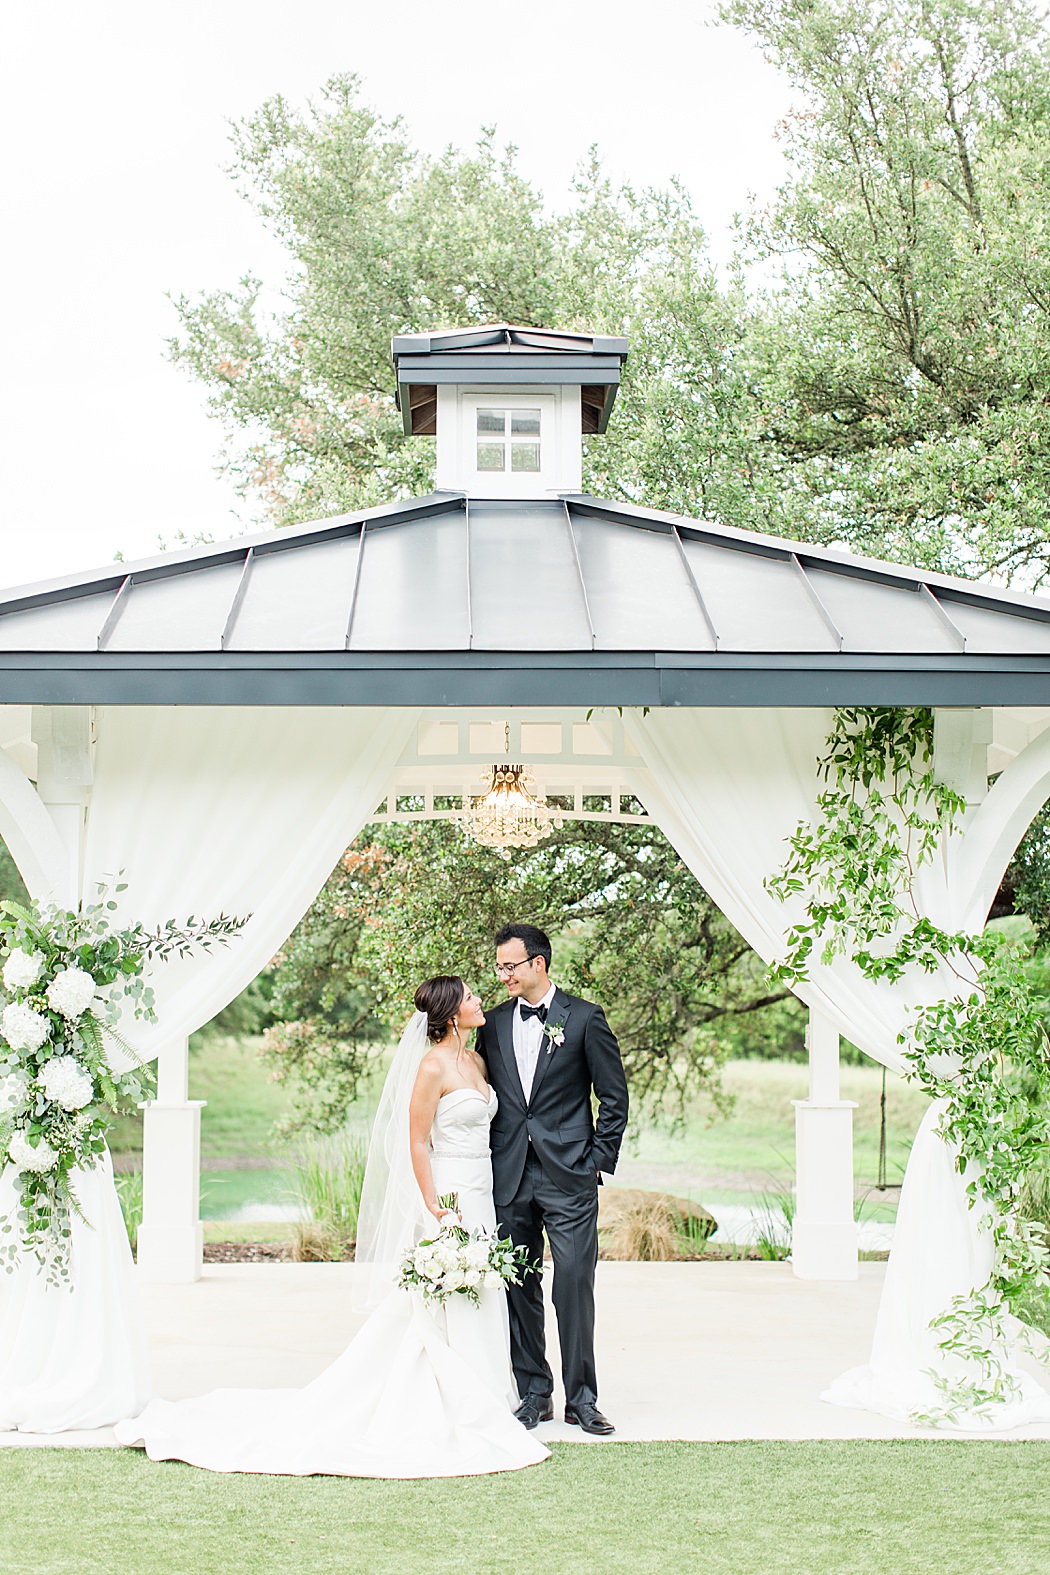 A Black and White Summer wedding at Kendall Point venue in Boerne Texas 0087